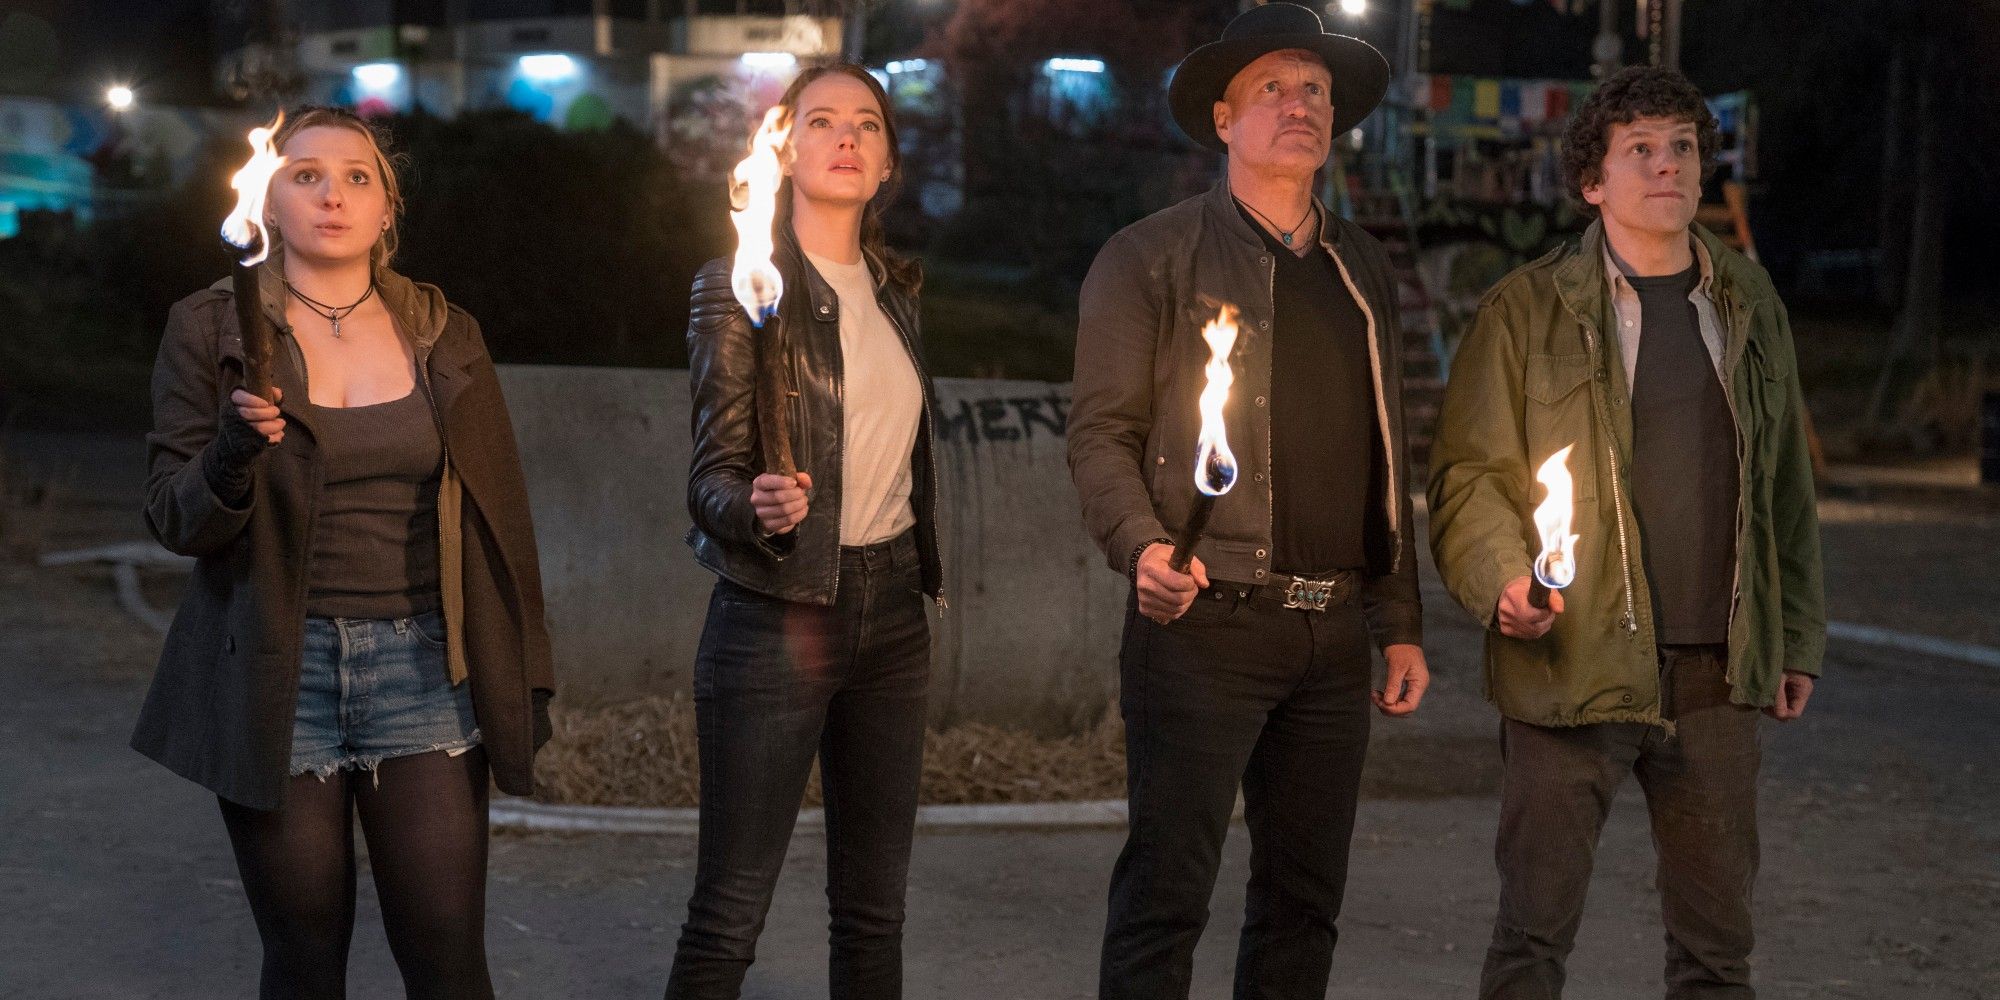 Abigail Breslin, Emma Stone, Woody Harrelson, and Jesse Eisenberg hold fire torches in Zombieland Double Tap